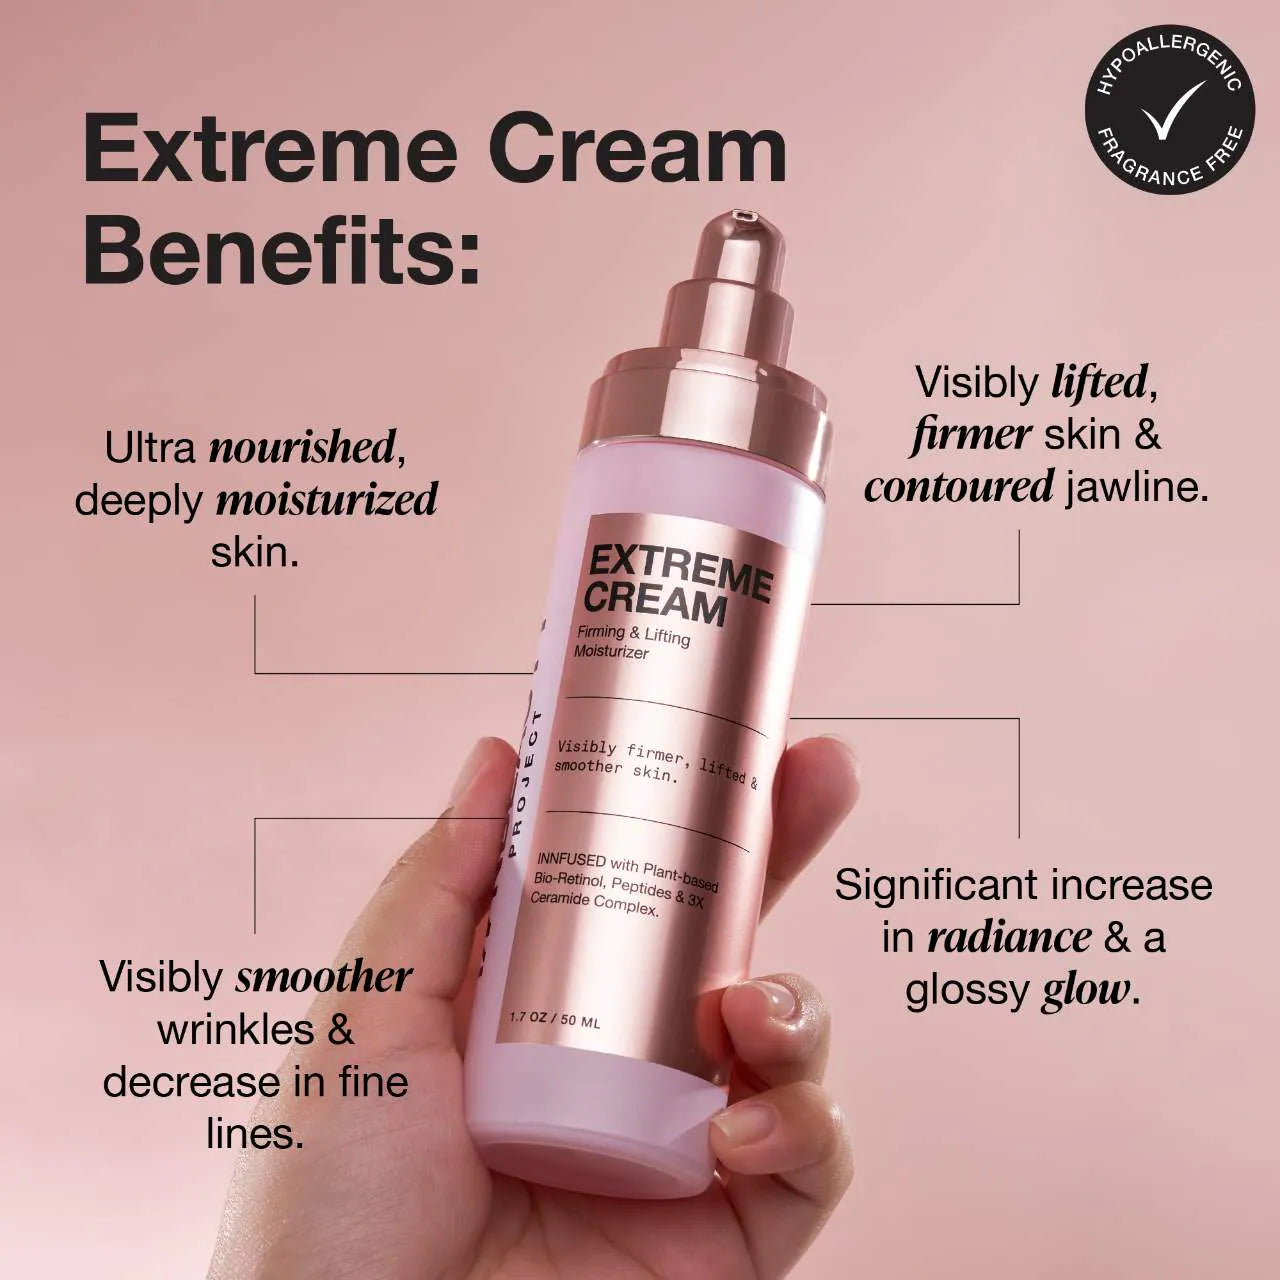 iNNBEAUTY PROJECT Extreme Cream Anti-Aging, Firming, & Lifting Refillable Moisturizer 50 ml